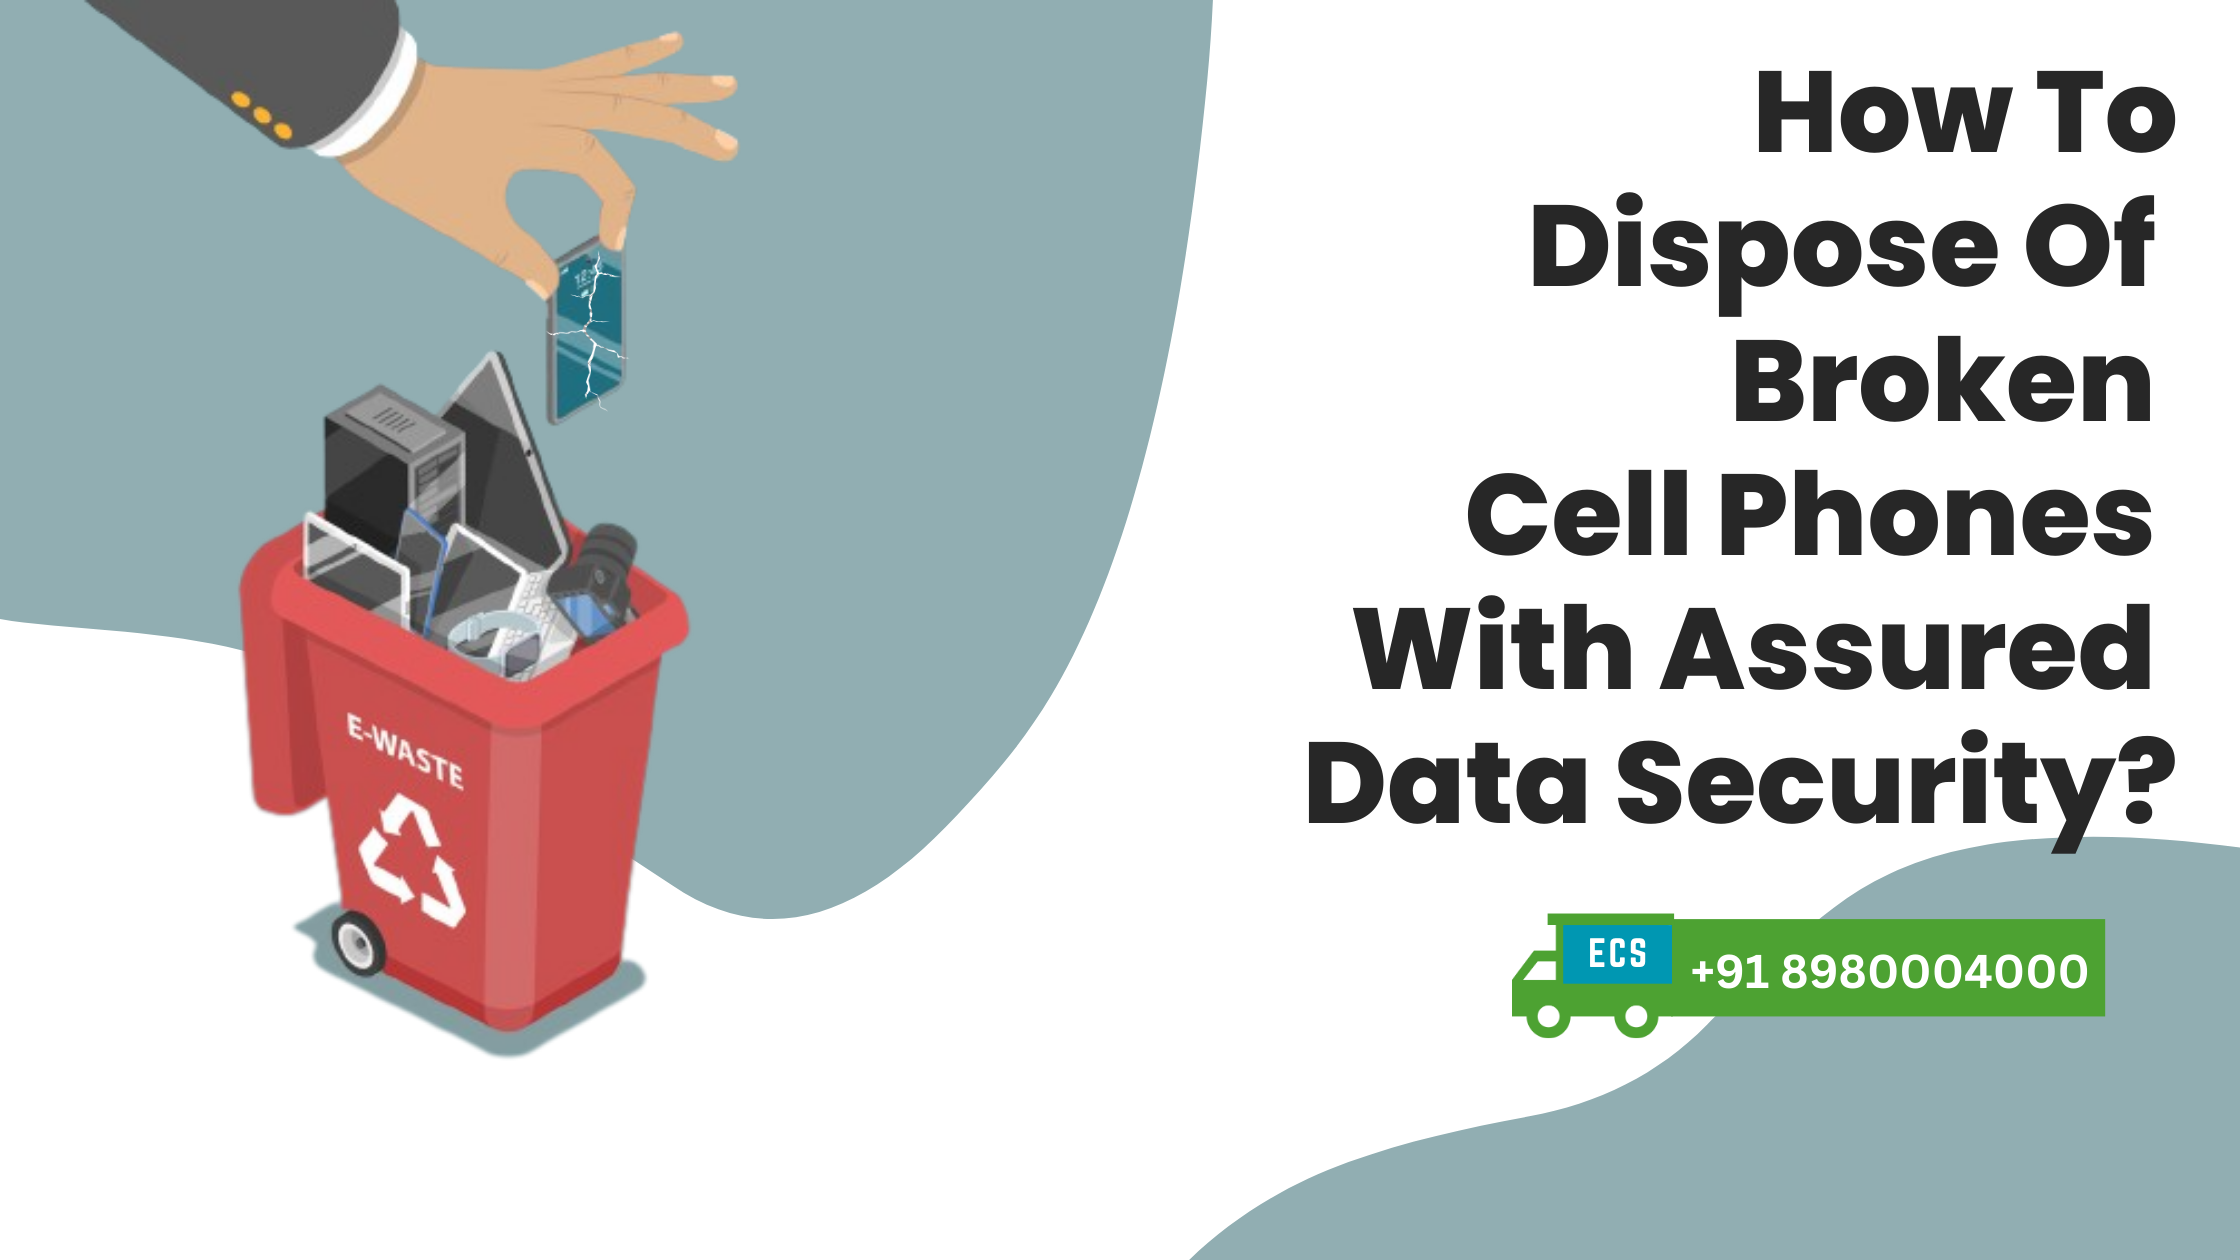 How To Dispose Of Broken Cell Phones with Assured Data Security?